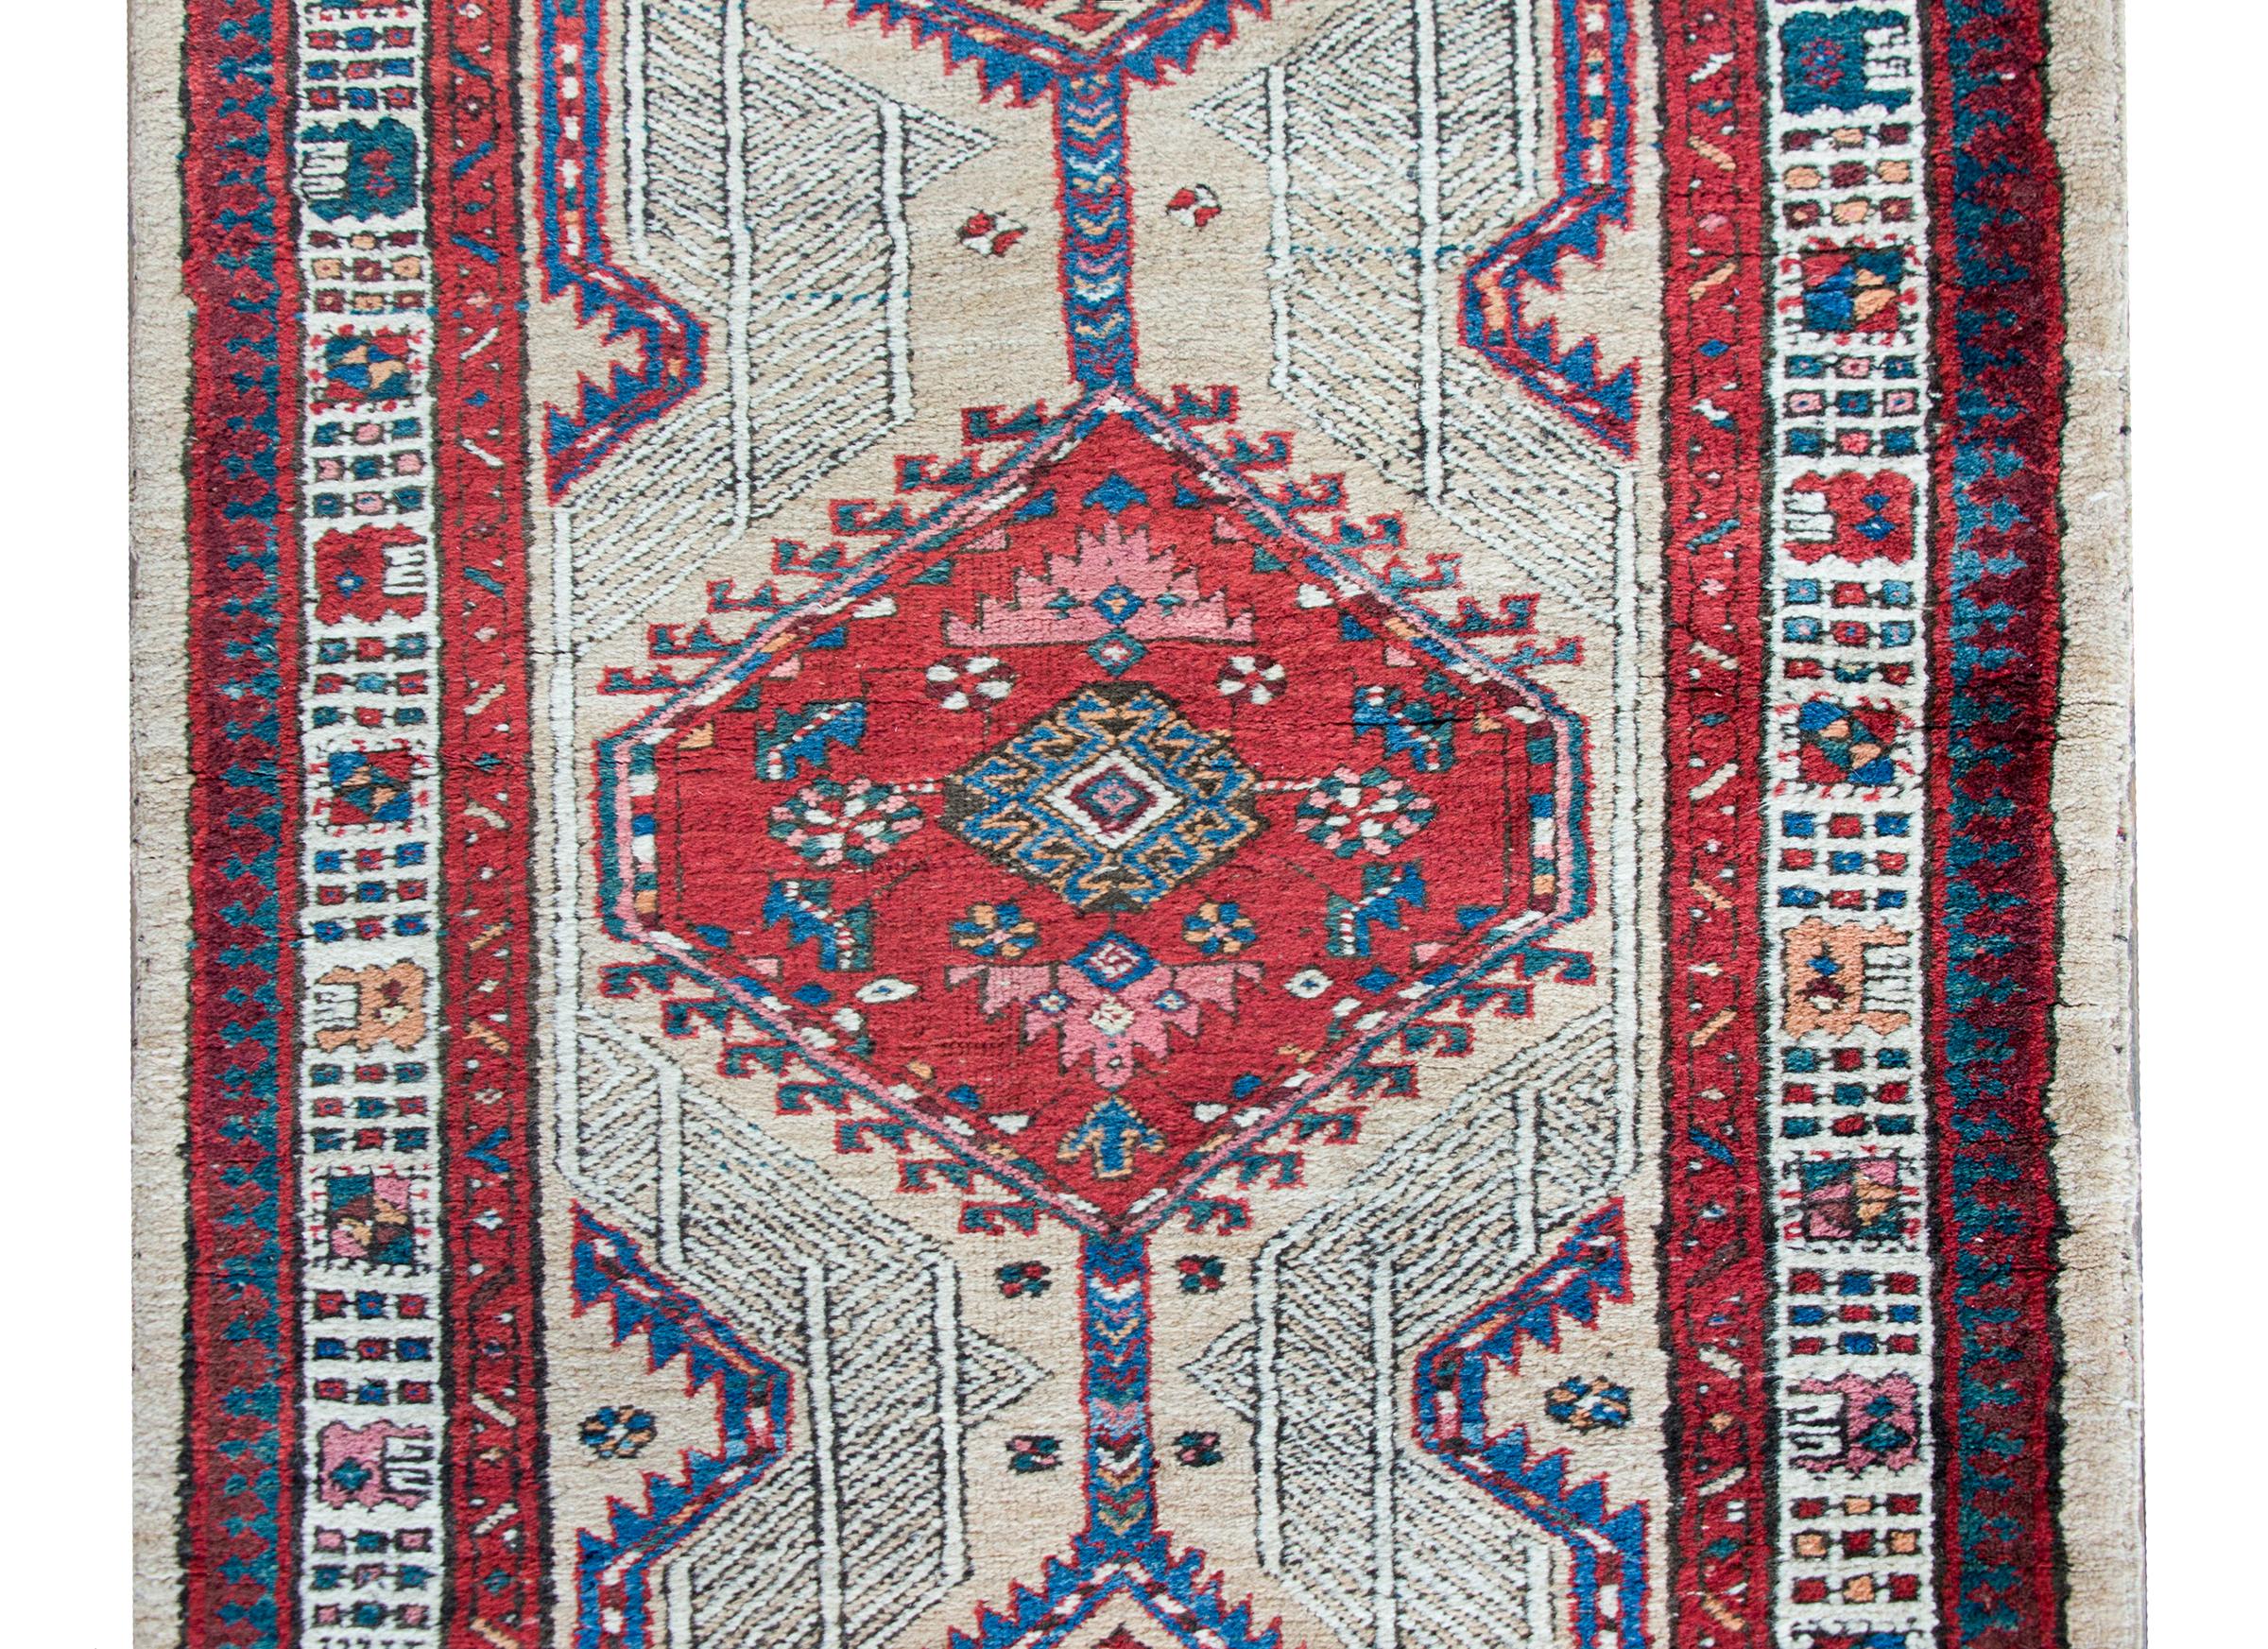 A remarkable early 20th century Persian Serab runner with a large crimson central diamond medallion flanked by two more smaller diamond medallions with stylized floral details, and living amidst a field more stylized flowers and scrolling vines,